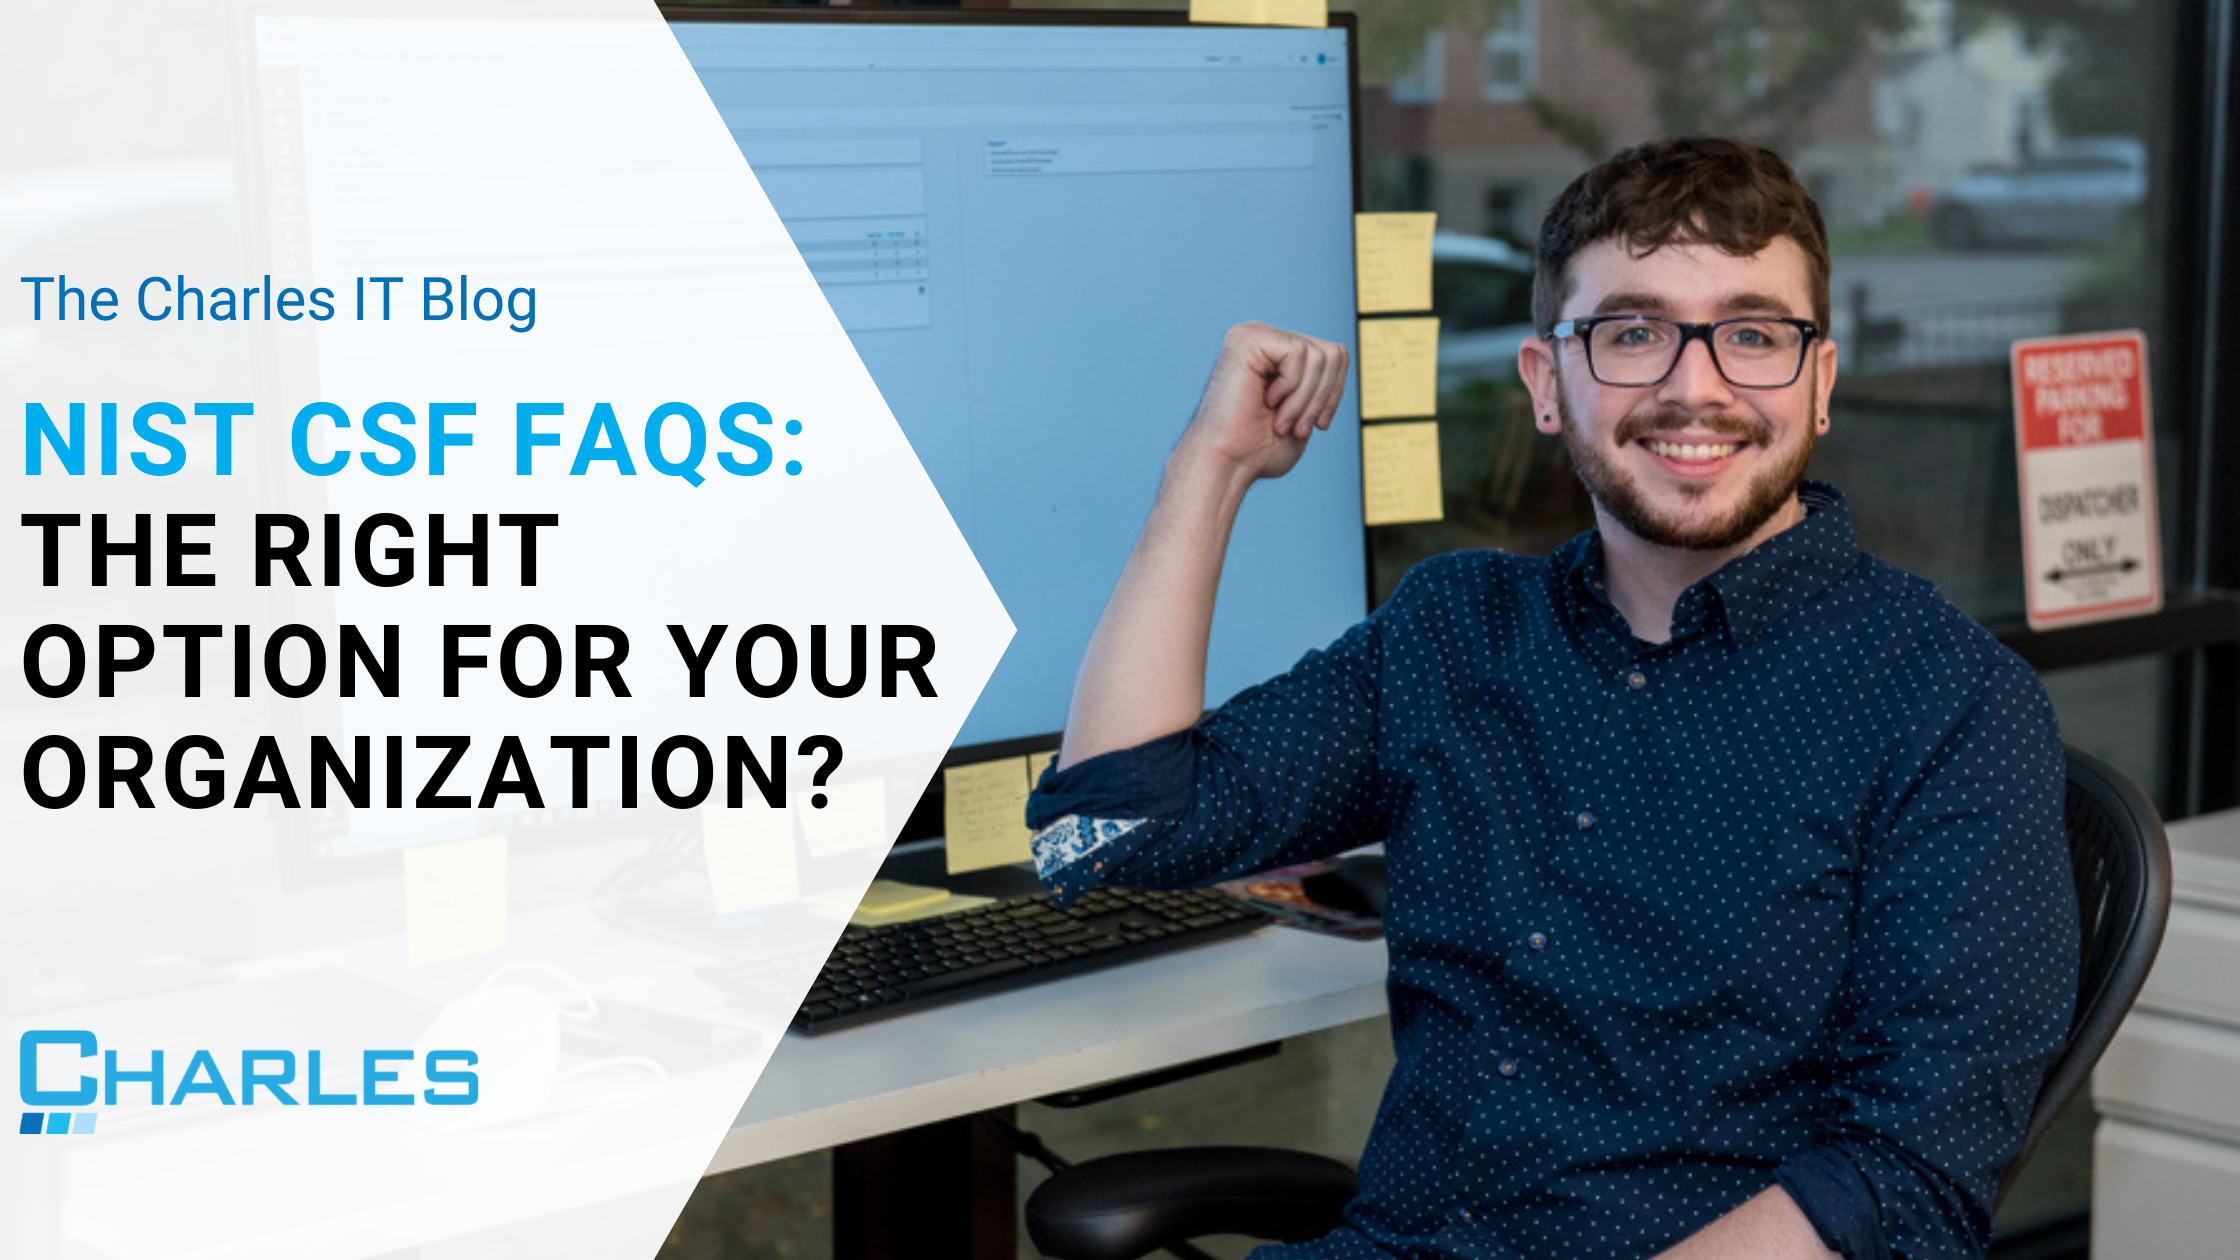 NIST CSF FAQs: The Right Option for Your Organization?